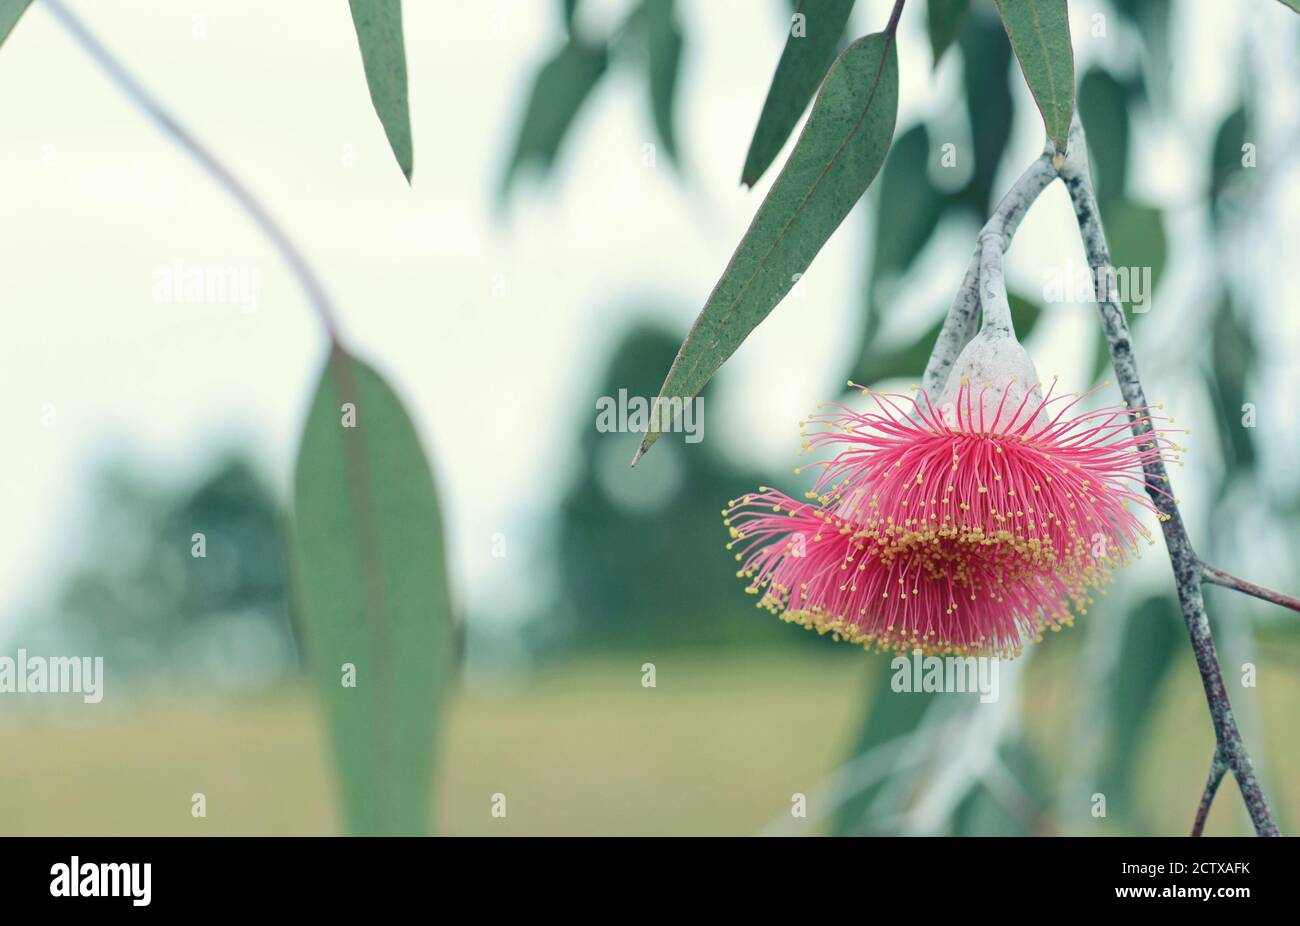 Spring nature background of two pink blossoms and grey green leaves of the Australian native mallee tree Eucalyptus caesia, family Myrtaceae. Common n Stock Photo